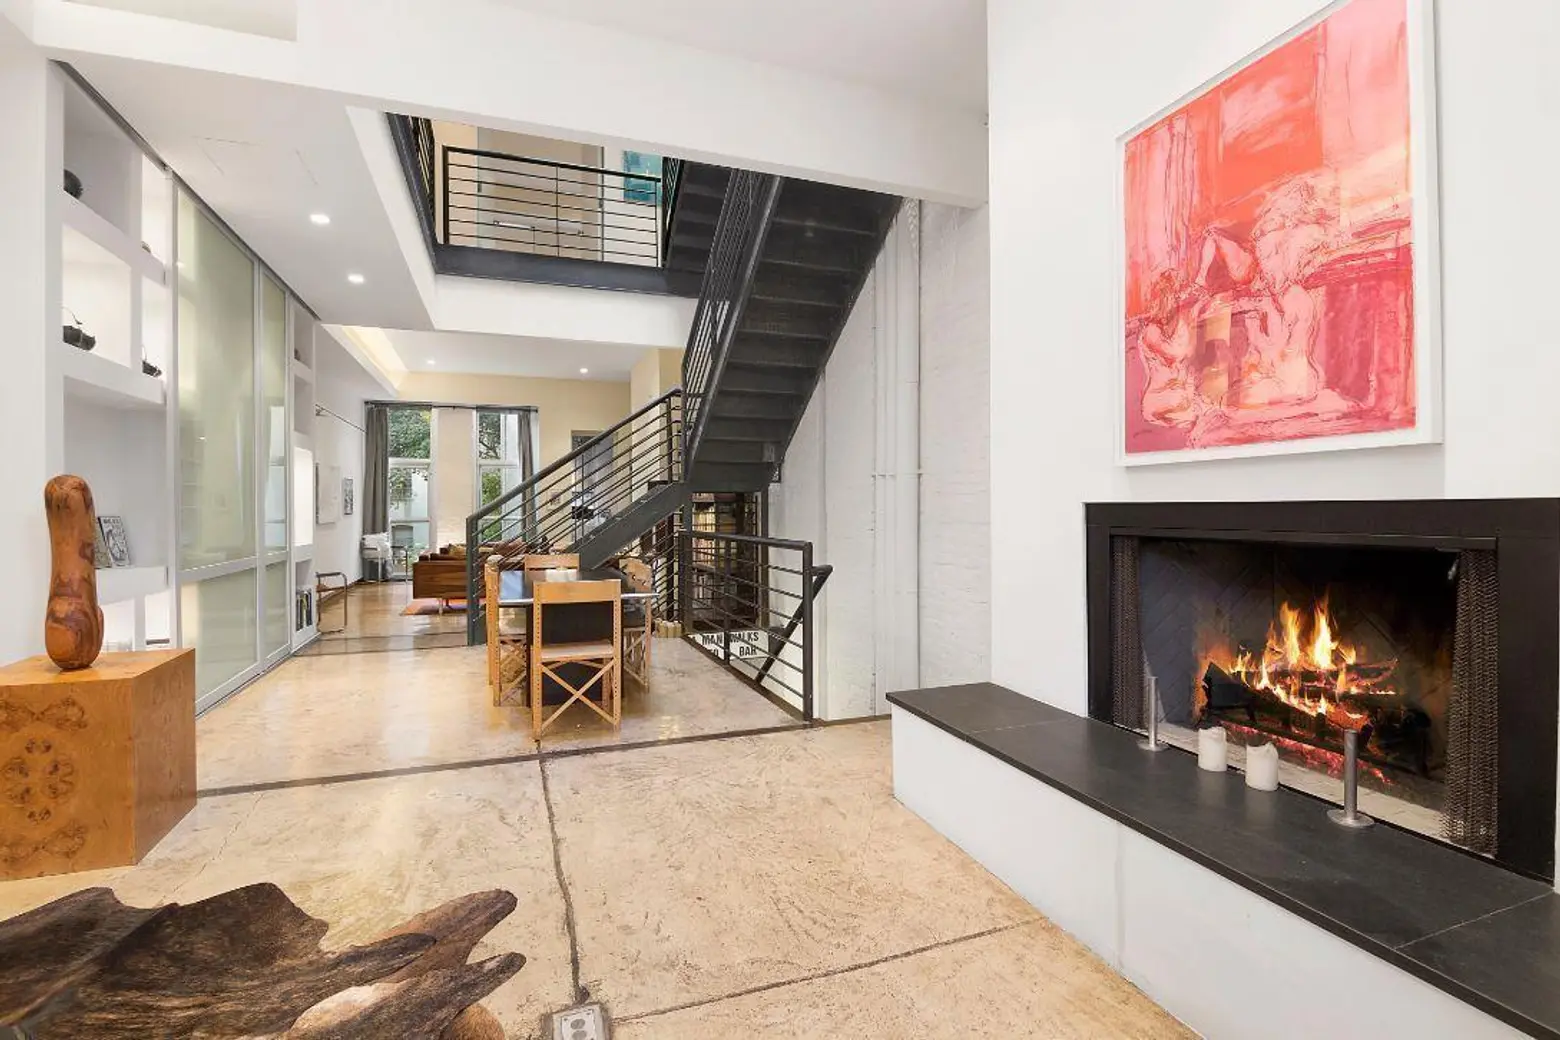 This $5.4M townhouse is Harlem historic on the outside, Soho sleek on the inside